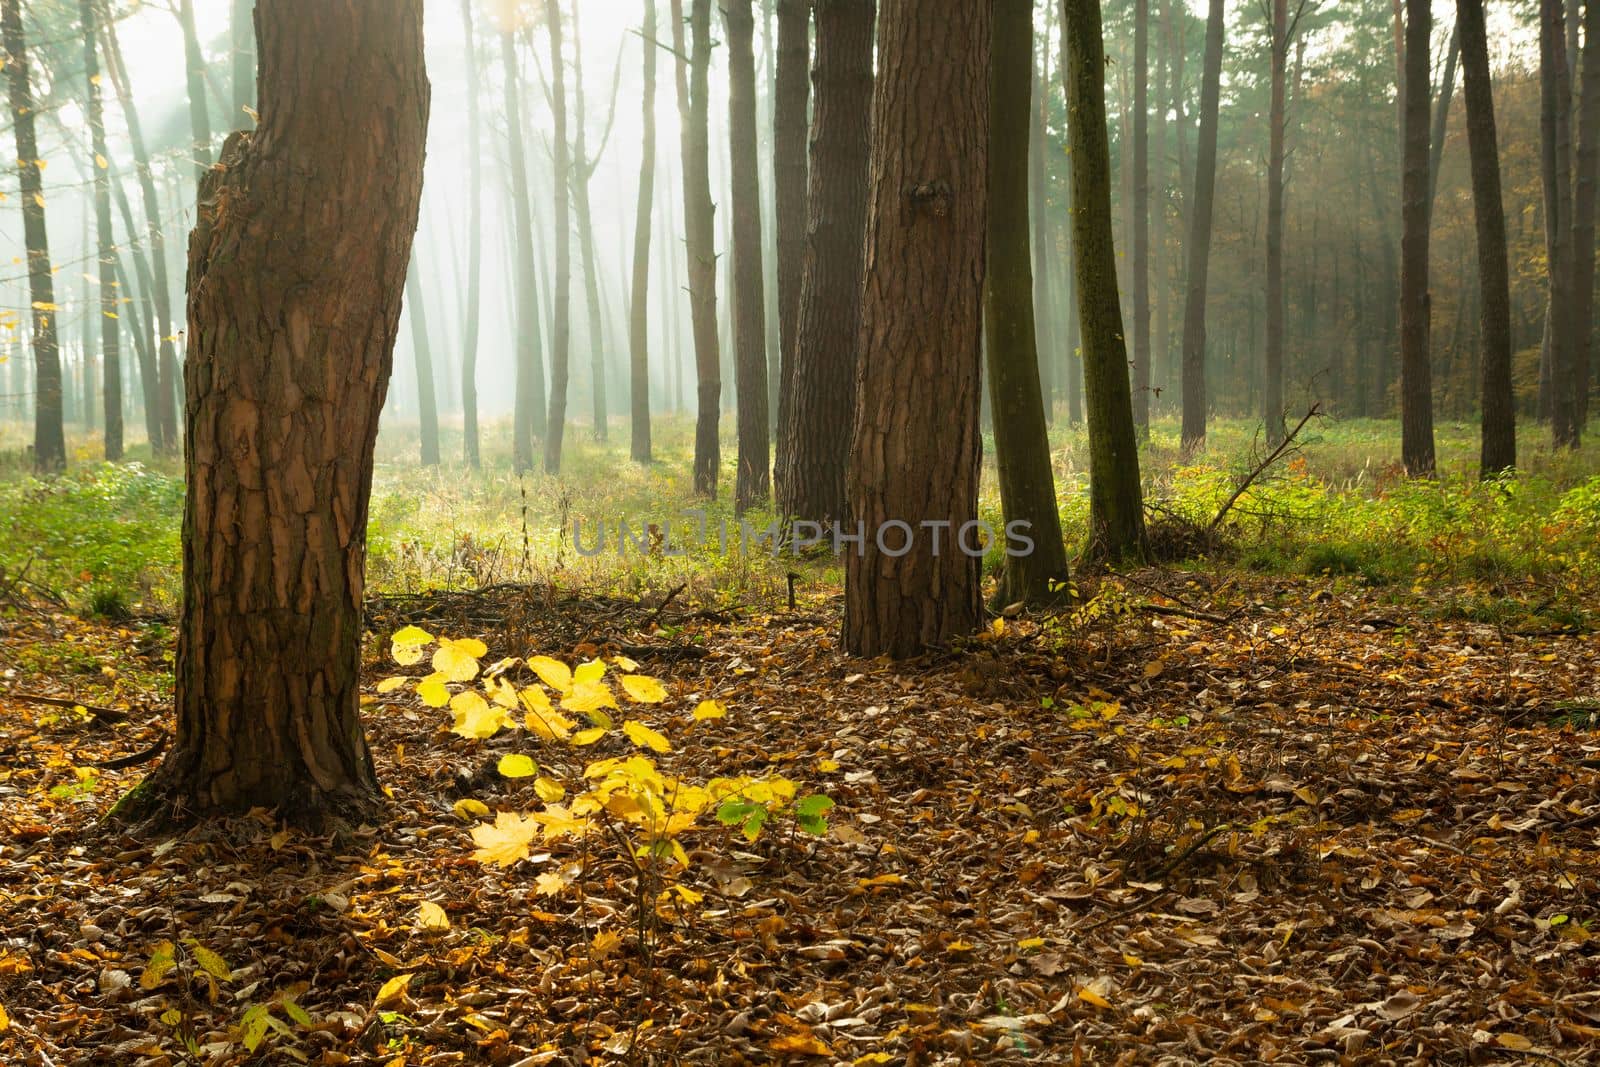 Sunglow and fog in a forest with thick trunks, Chelm, Poland